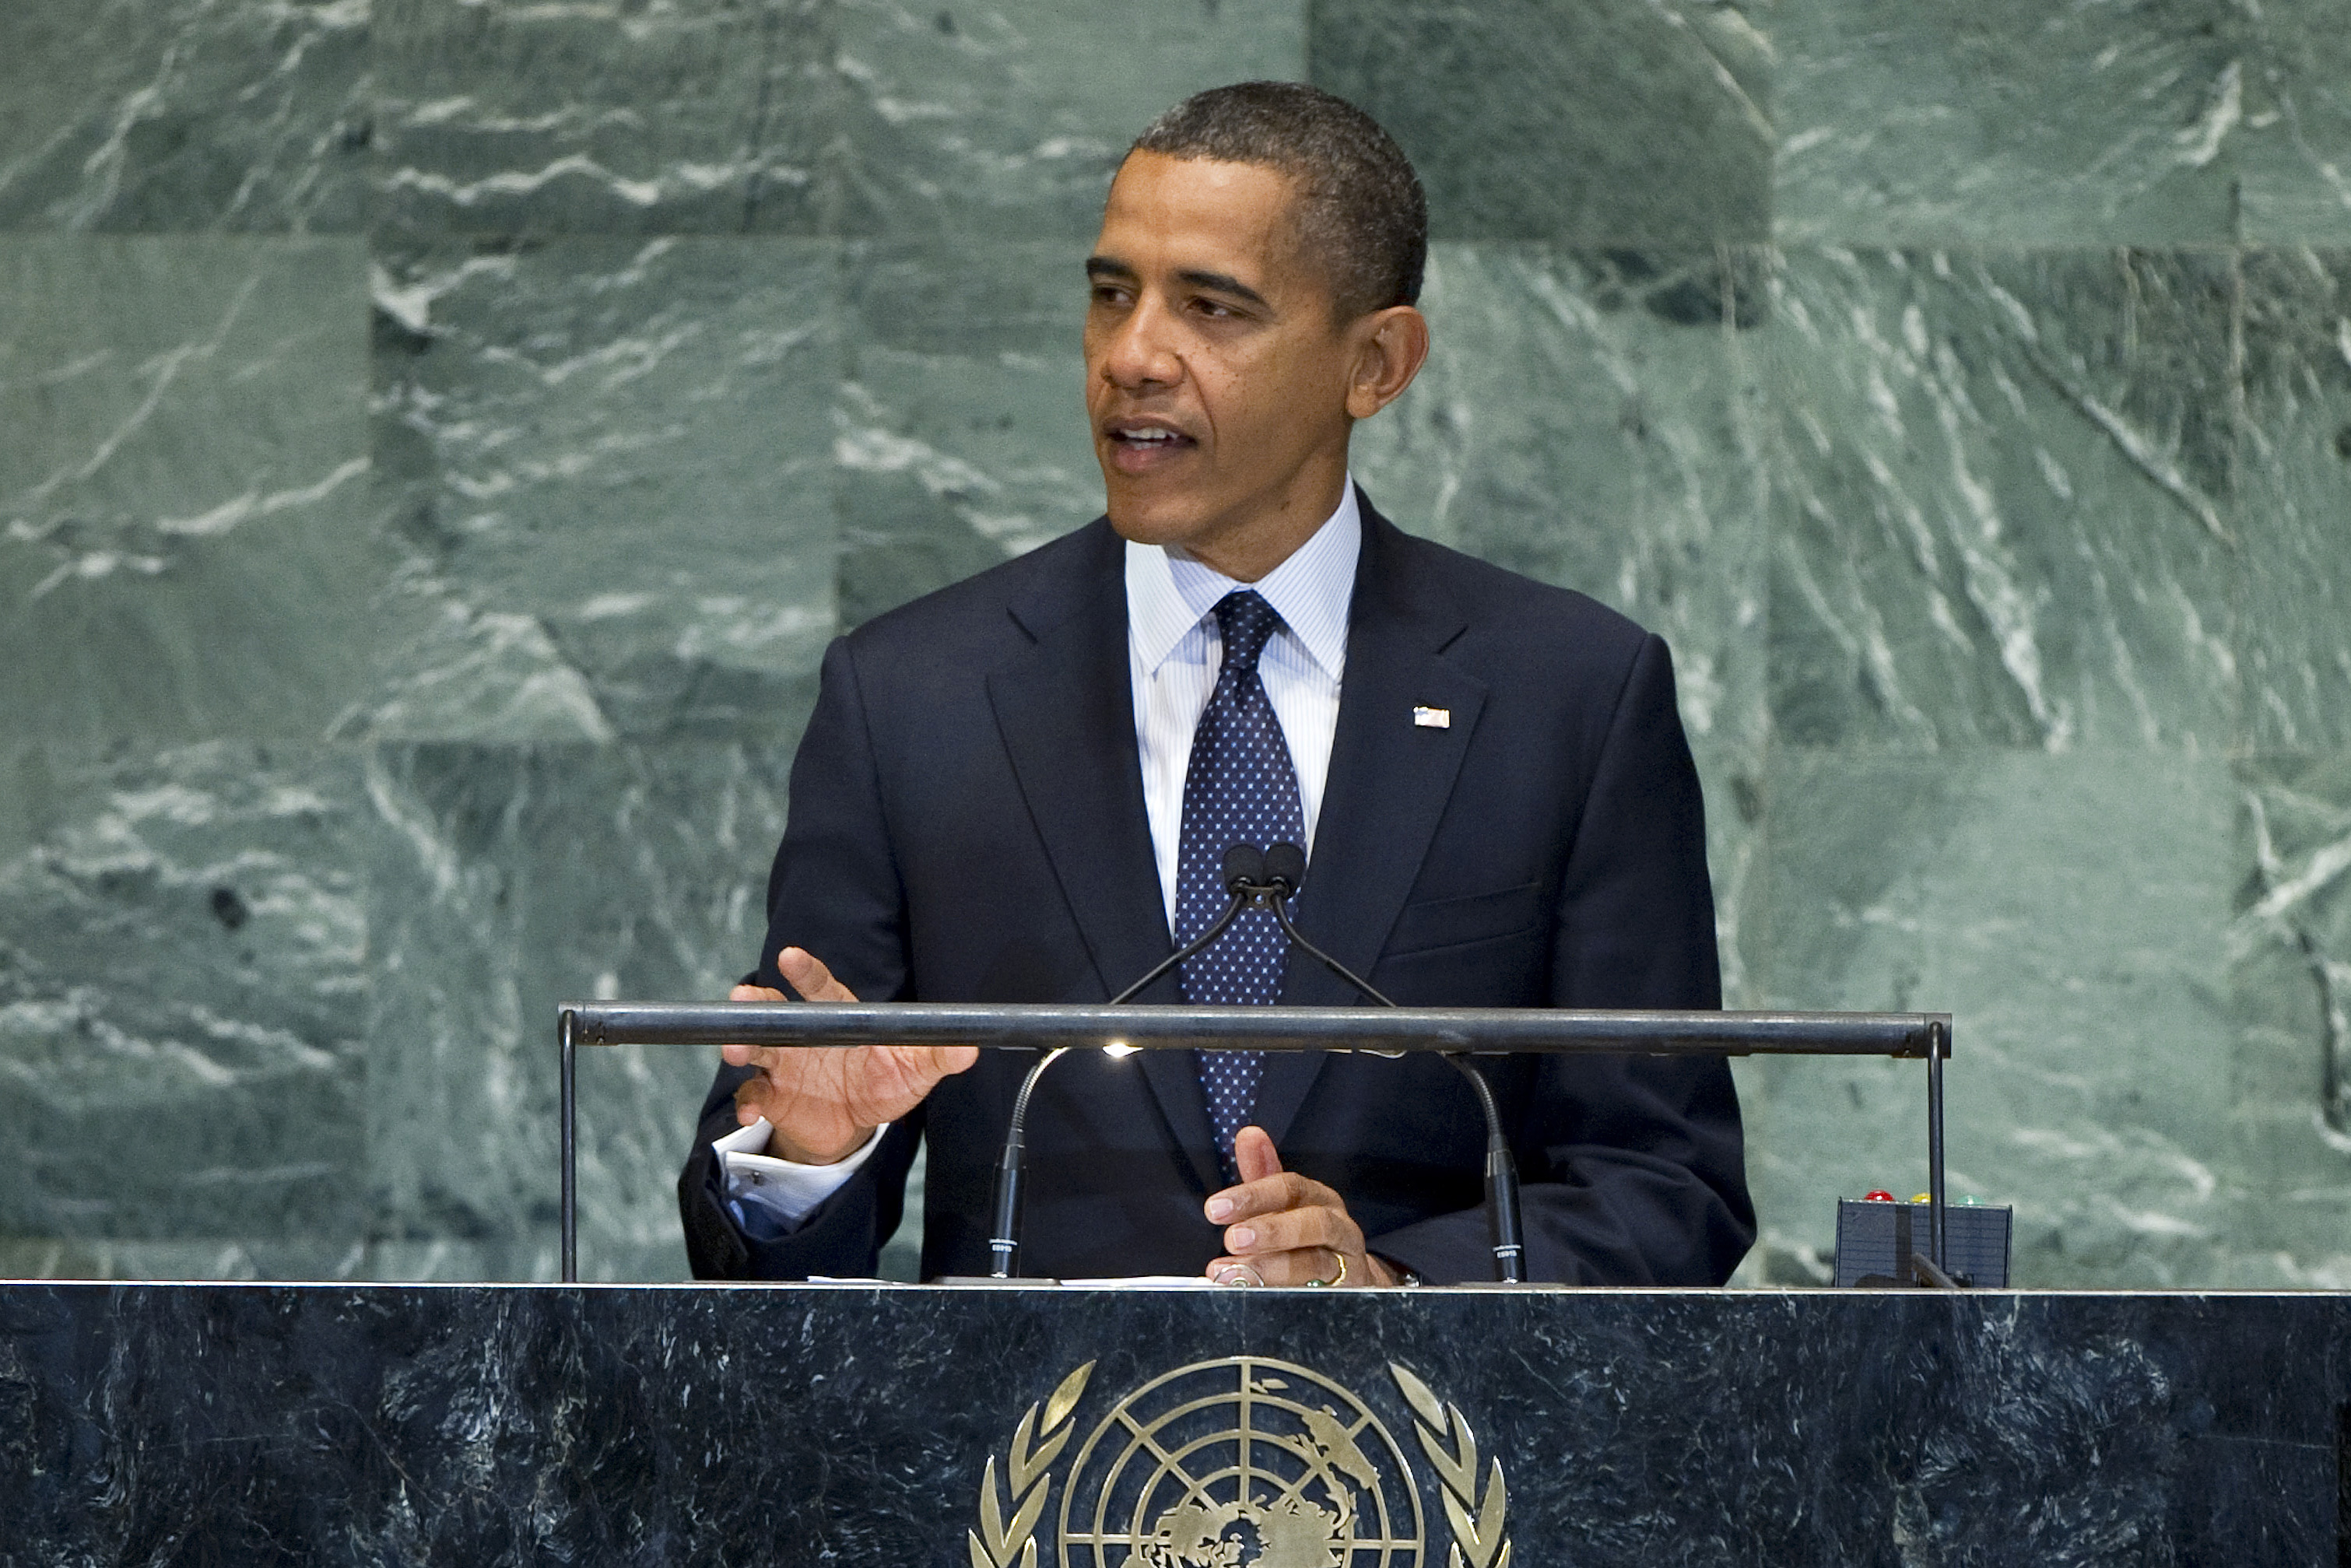 H.E. Mr. Barack Obama, President of the United States of America addresses the general debate of the sixty-seventh session of the General Assembly.